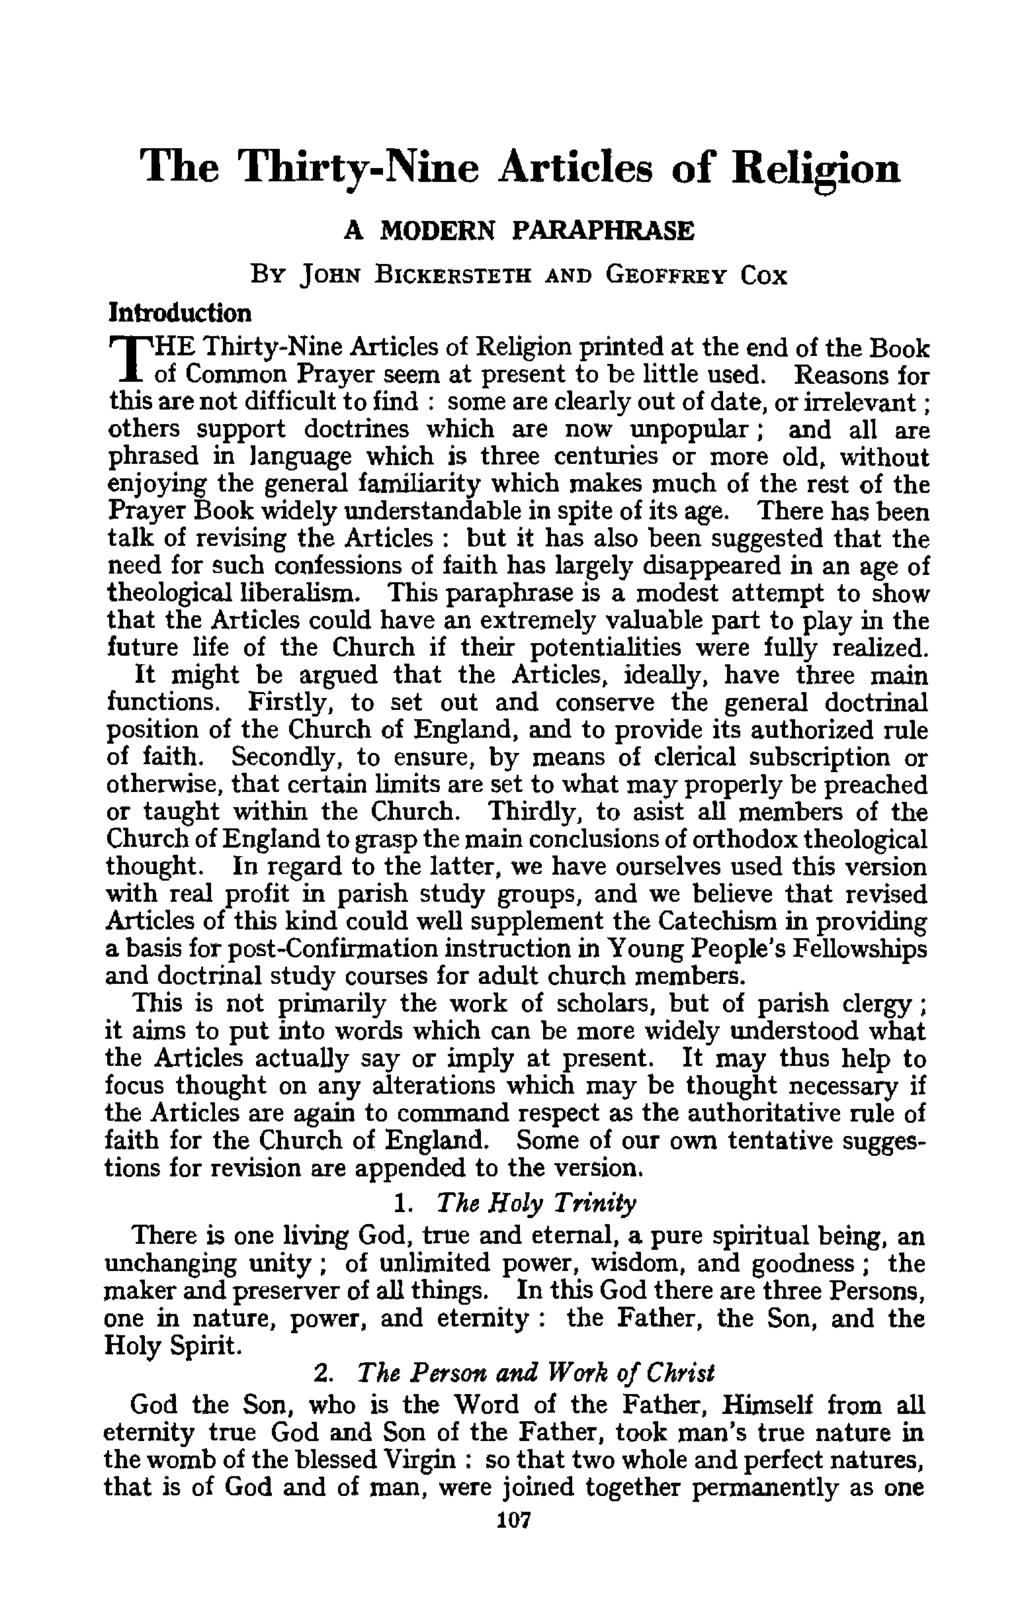 The Thirty-Nine Articles of Religion A MODERN PARAPHRASE BY JOHN BICKERSTETH AND GEOFFREY Cox Introduction THE Thirty-Nine Articles of Religion printed at the end of the Book of Common Prayer seem at